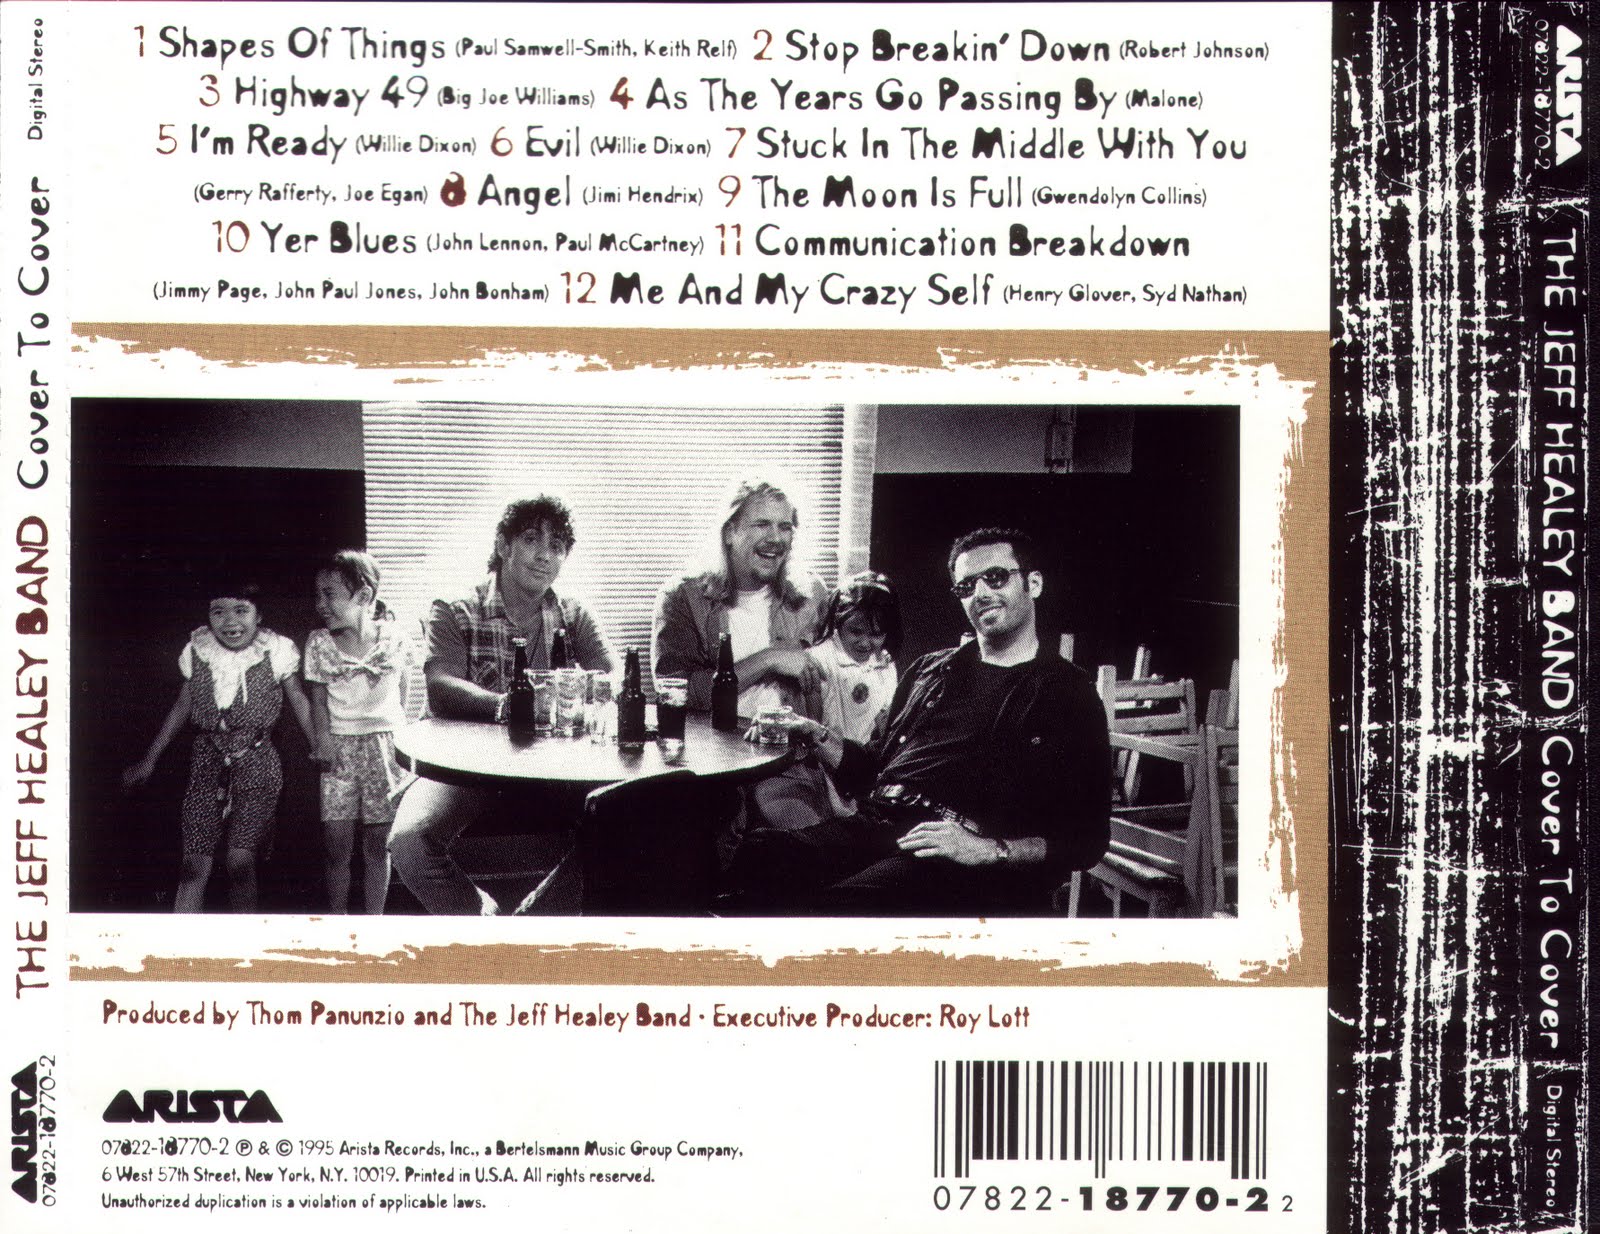 [The+Jeff+Healey+Band-+Cover+to+cover-+Trasera+USA.jpg]